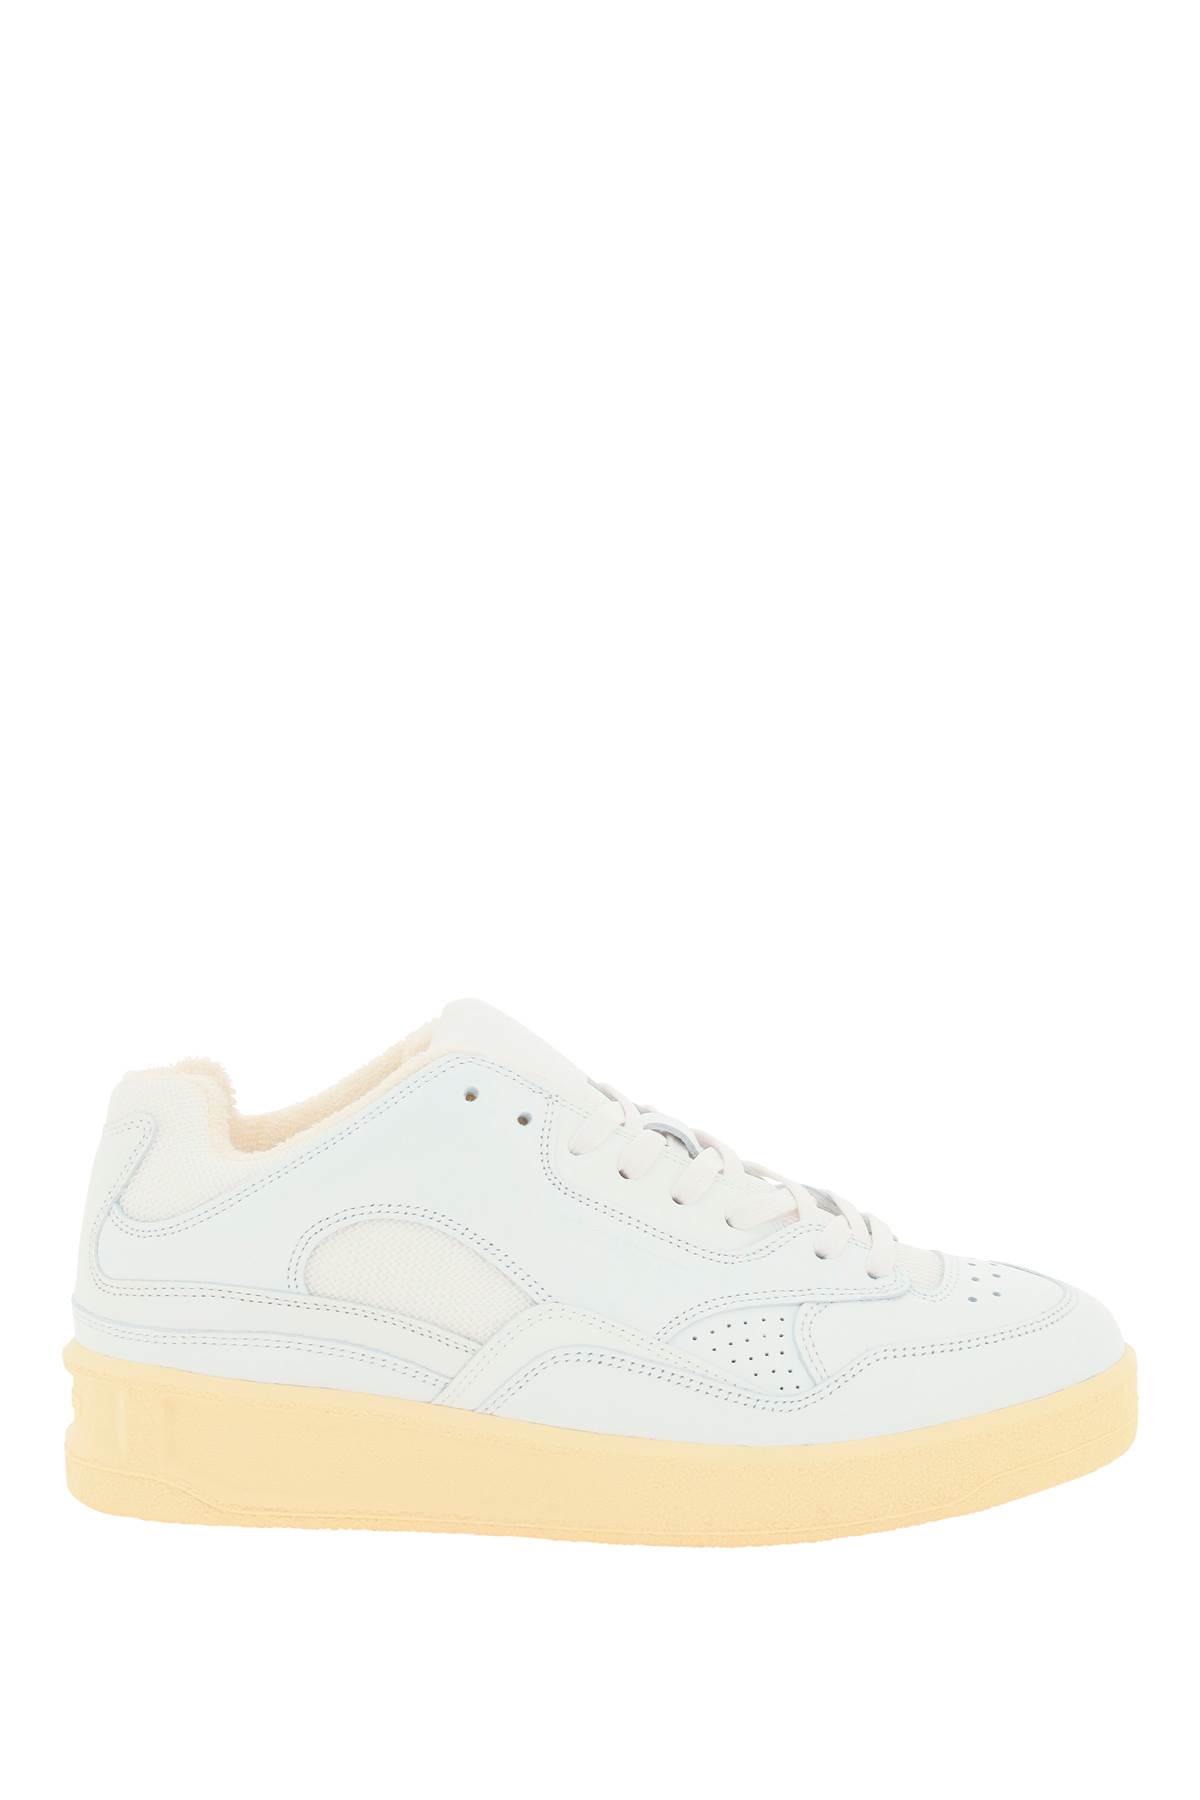 JIL SANDER LEATHER AND MESH SNEAKERS